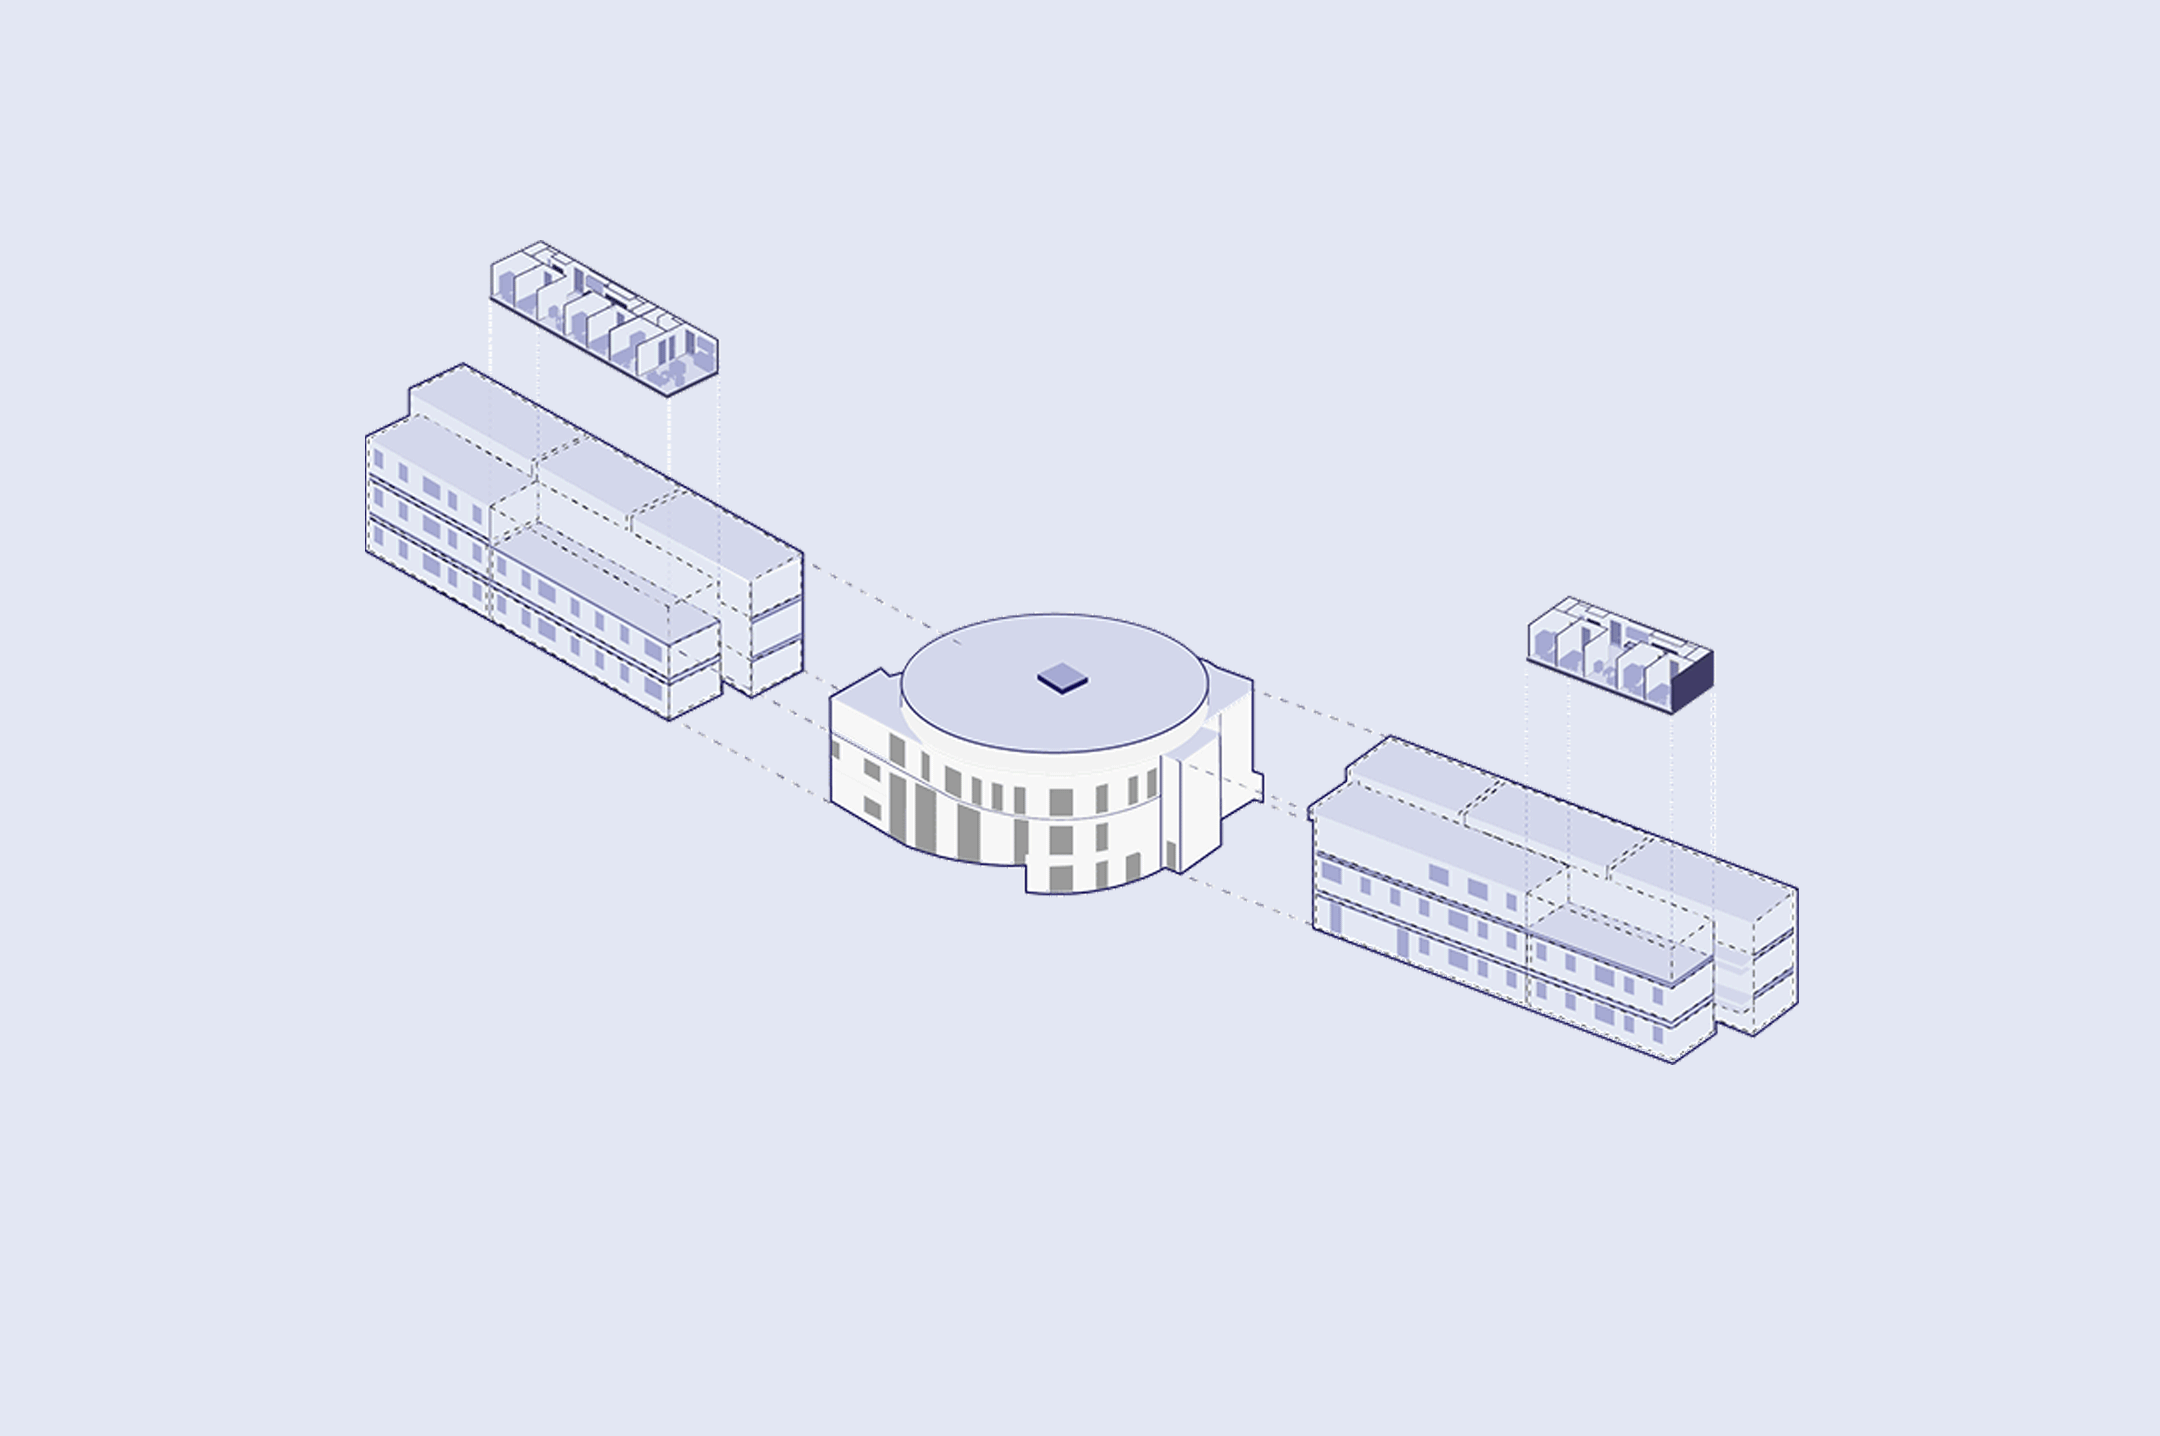 A GIF of a drawing of the structure of the building.